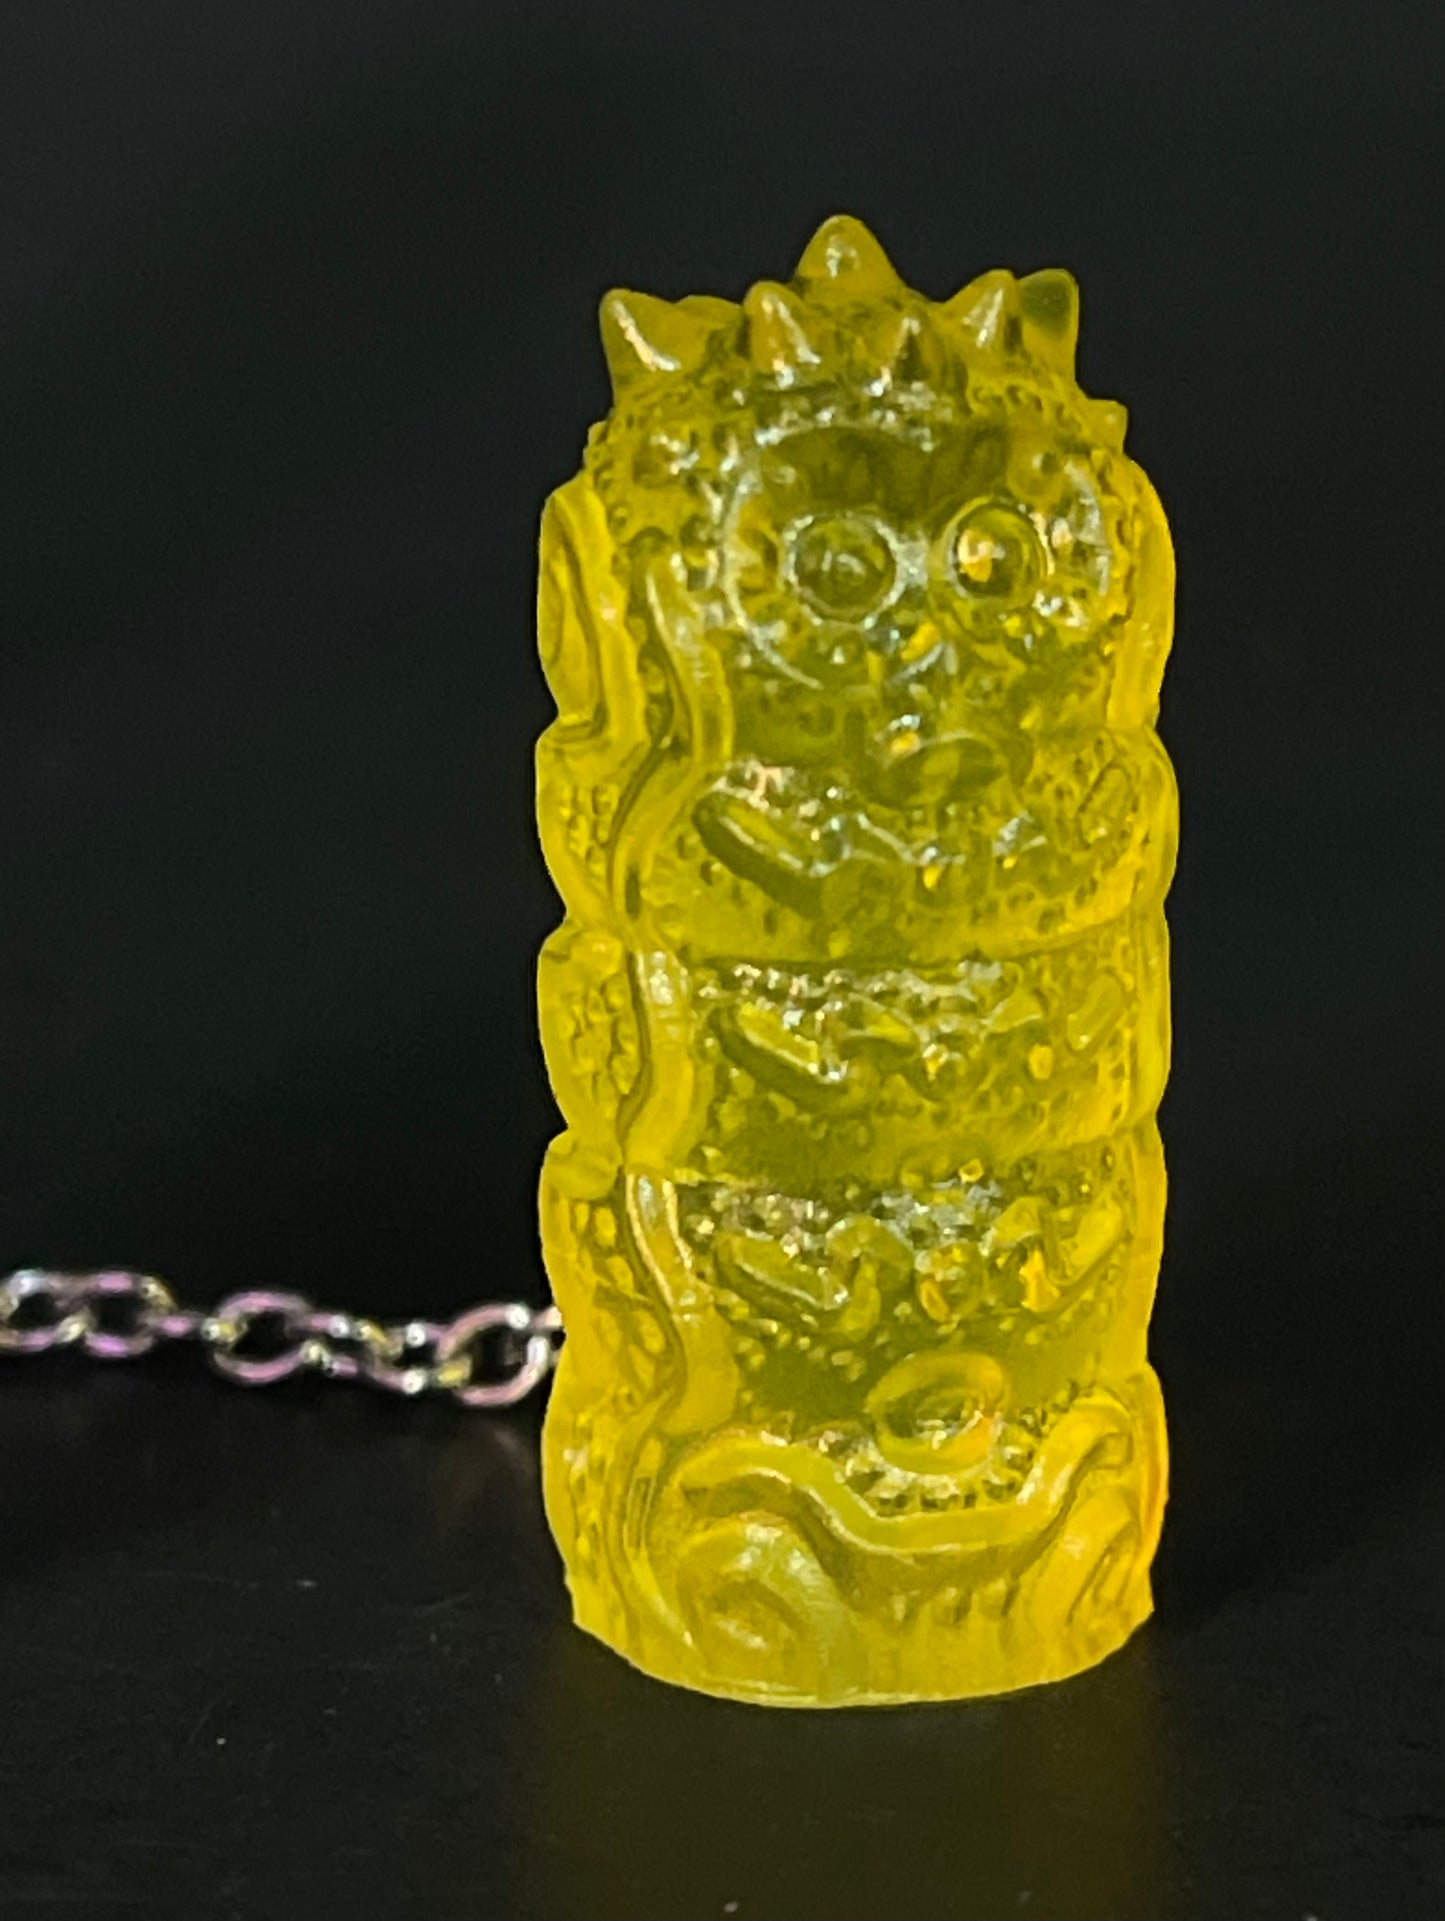 Robot Worm: Tiny Chained Transparent Set